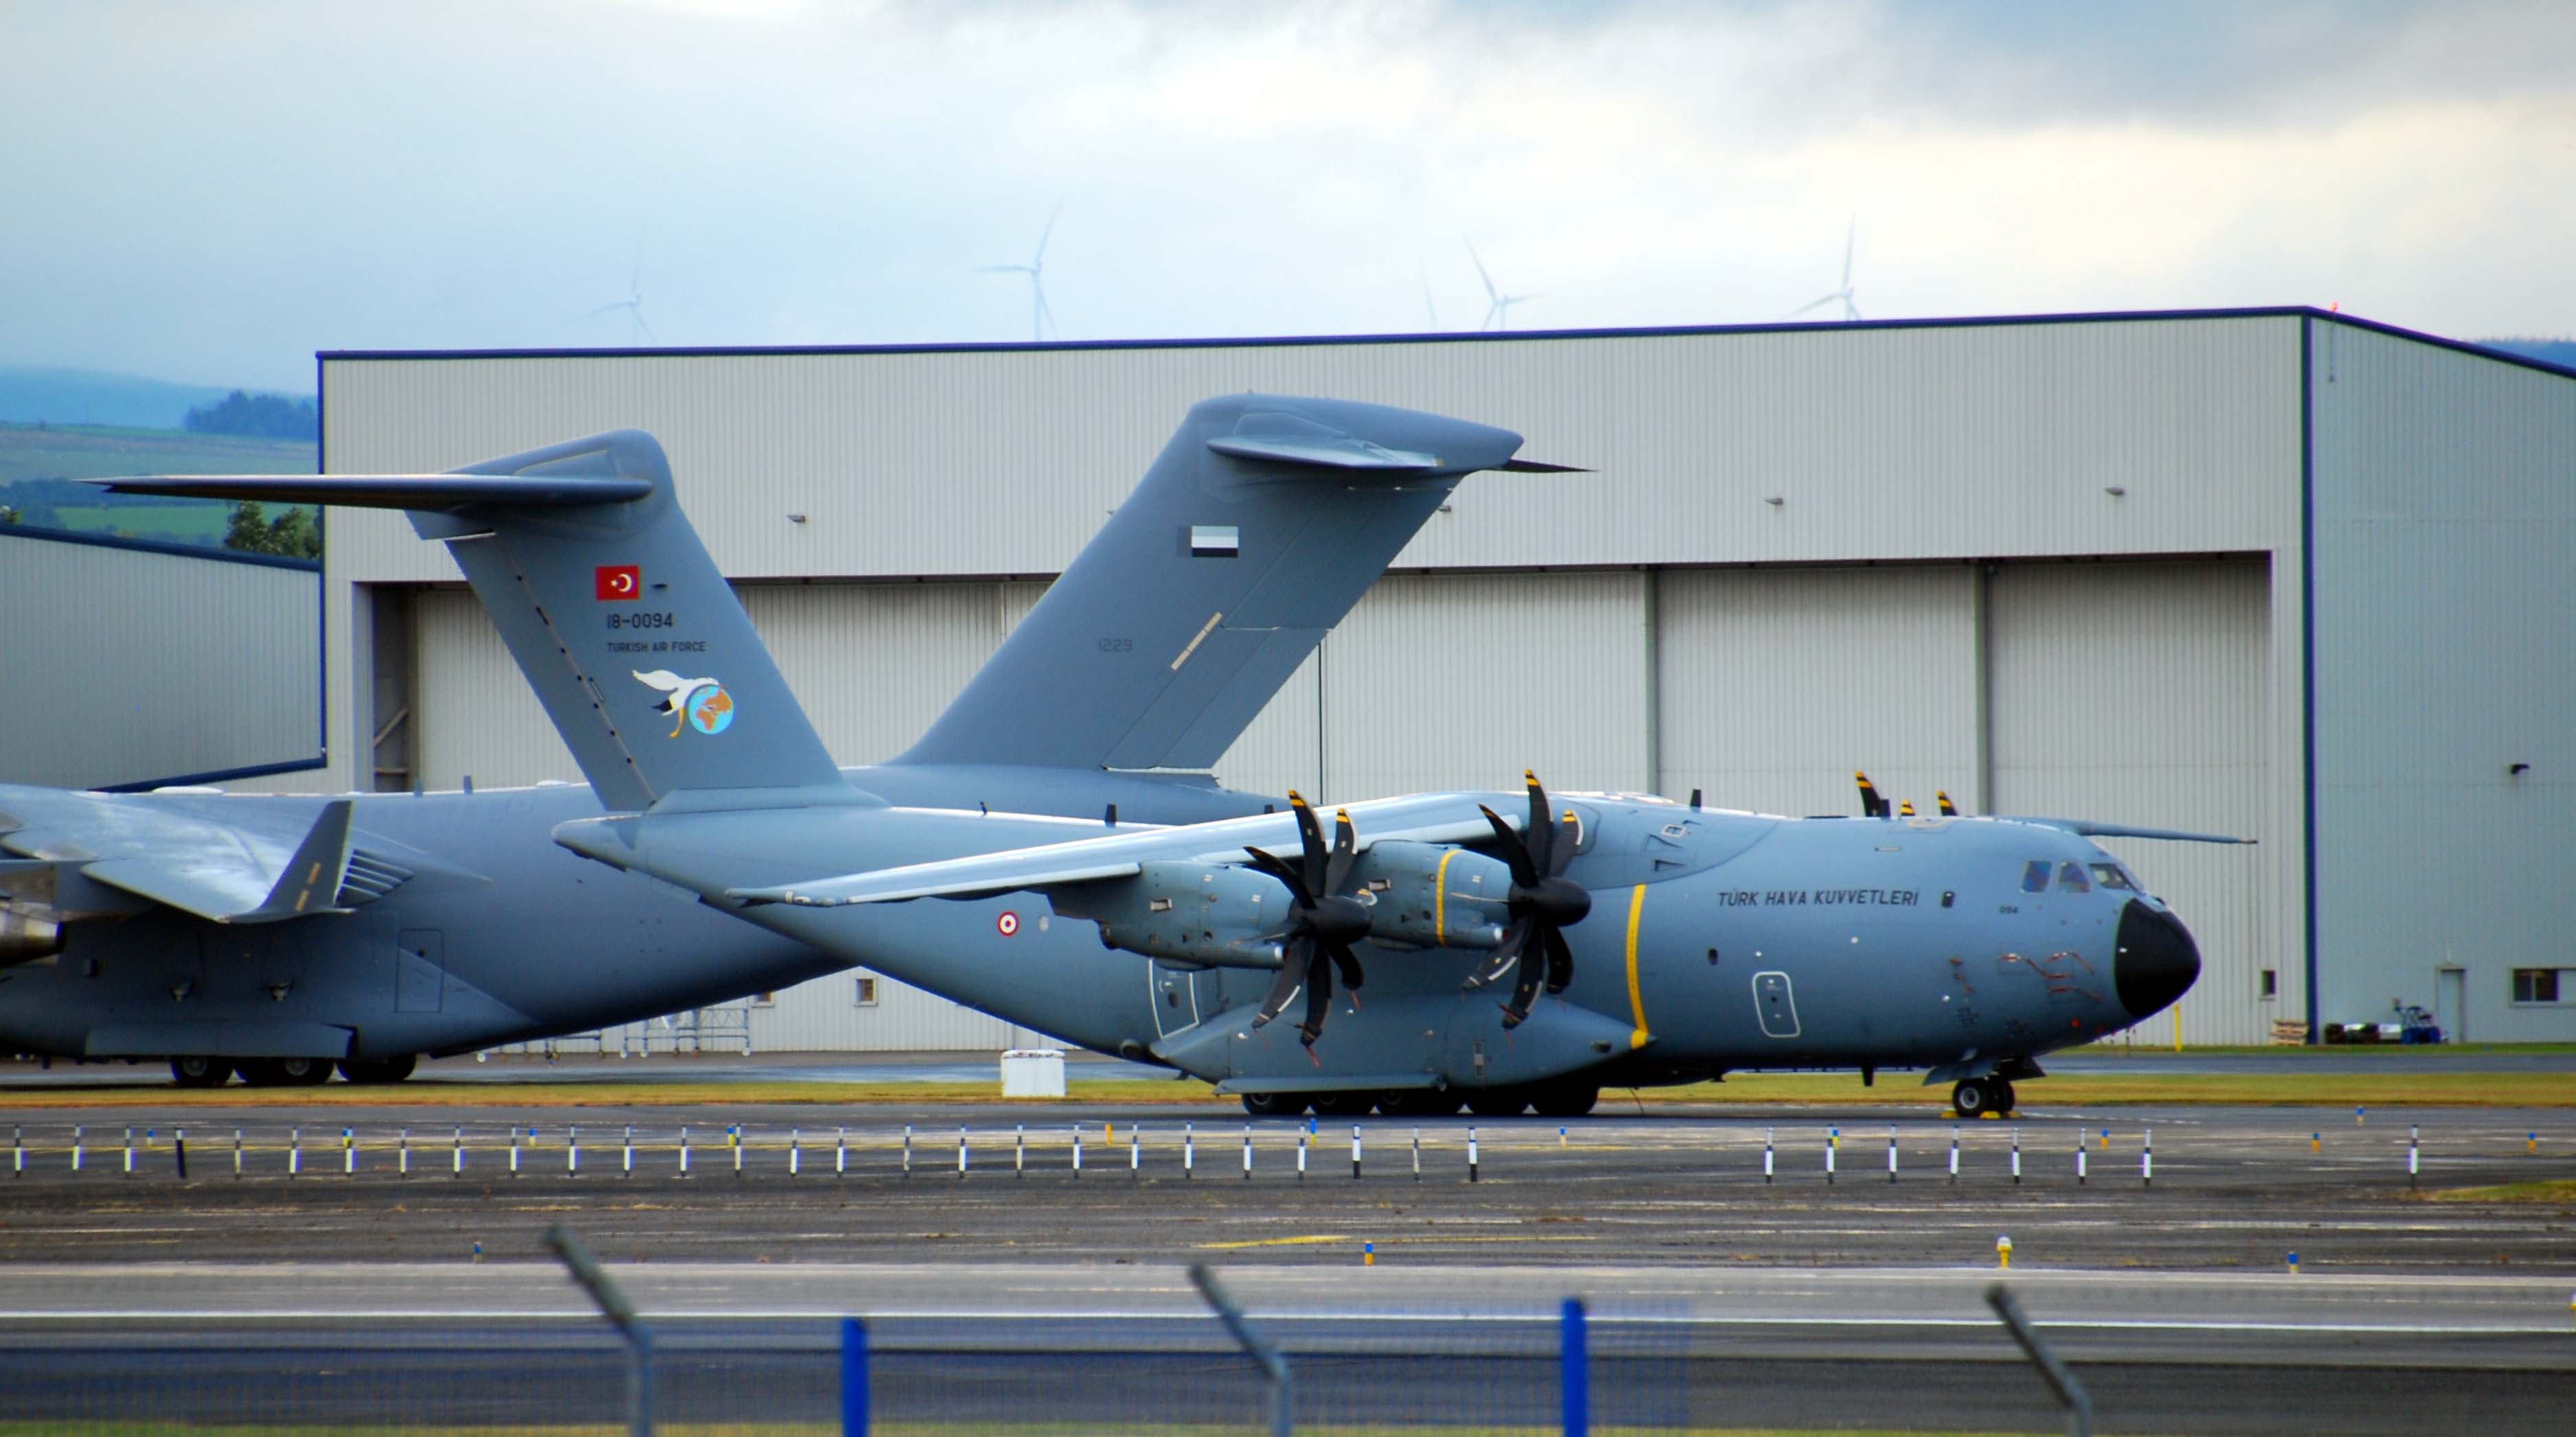 18-0094/180094 Turkish Air Force Airbus A400M Airframe Information - AVSpotters.com